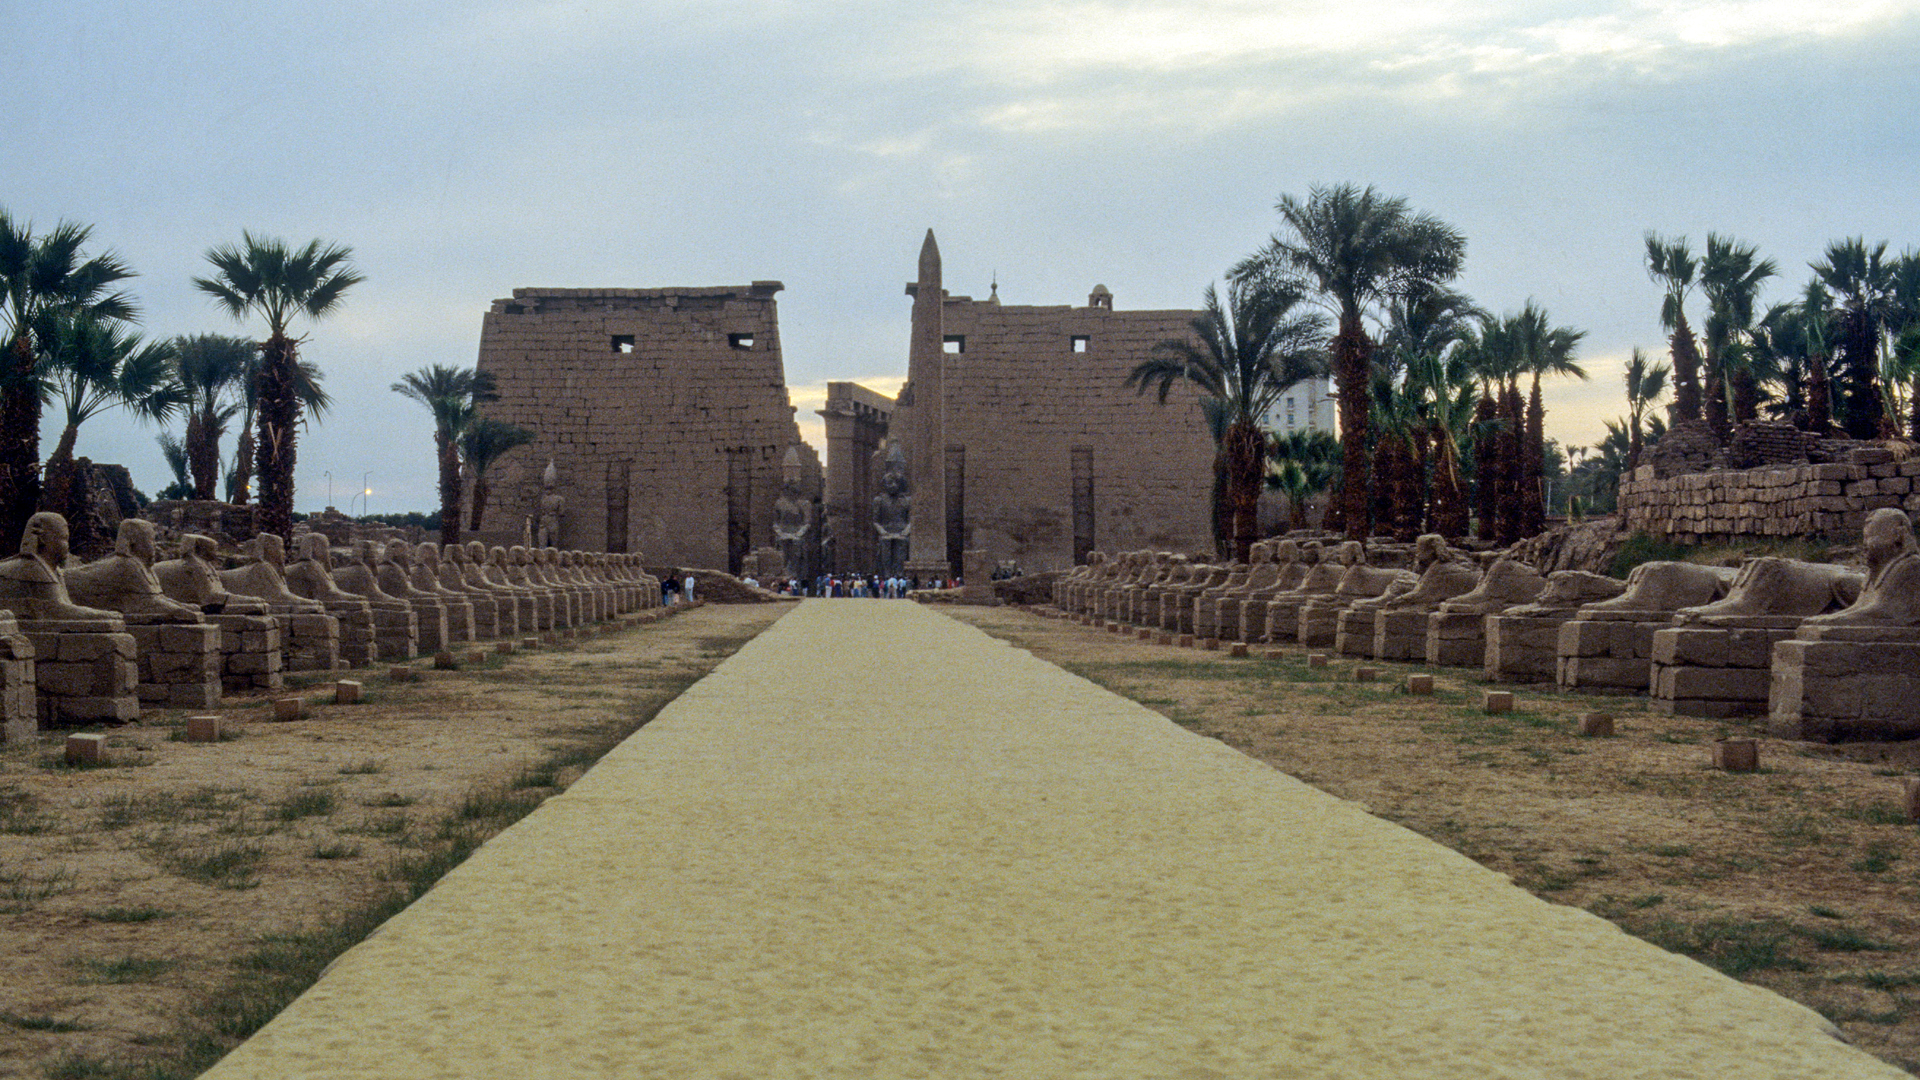 THE AVENUE OF SPHINXES, LUXOR